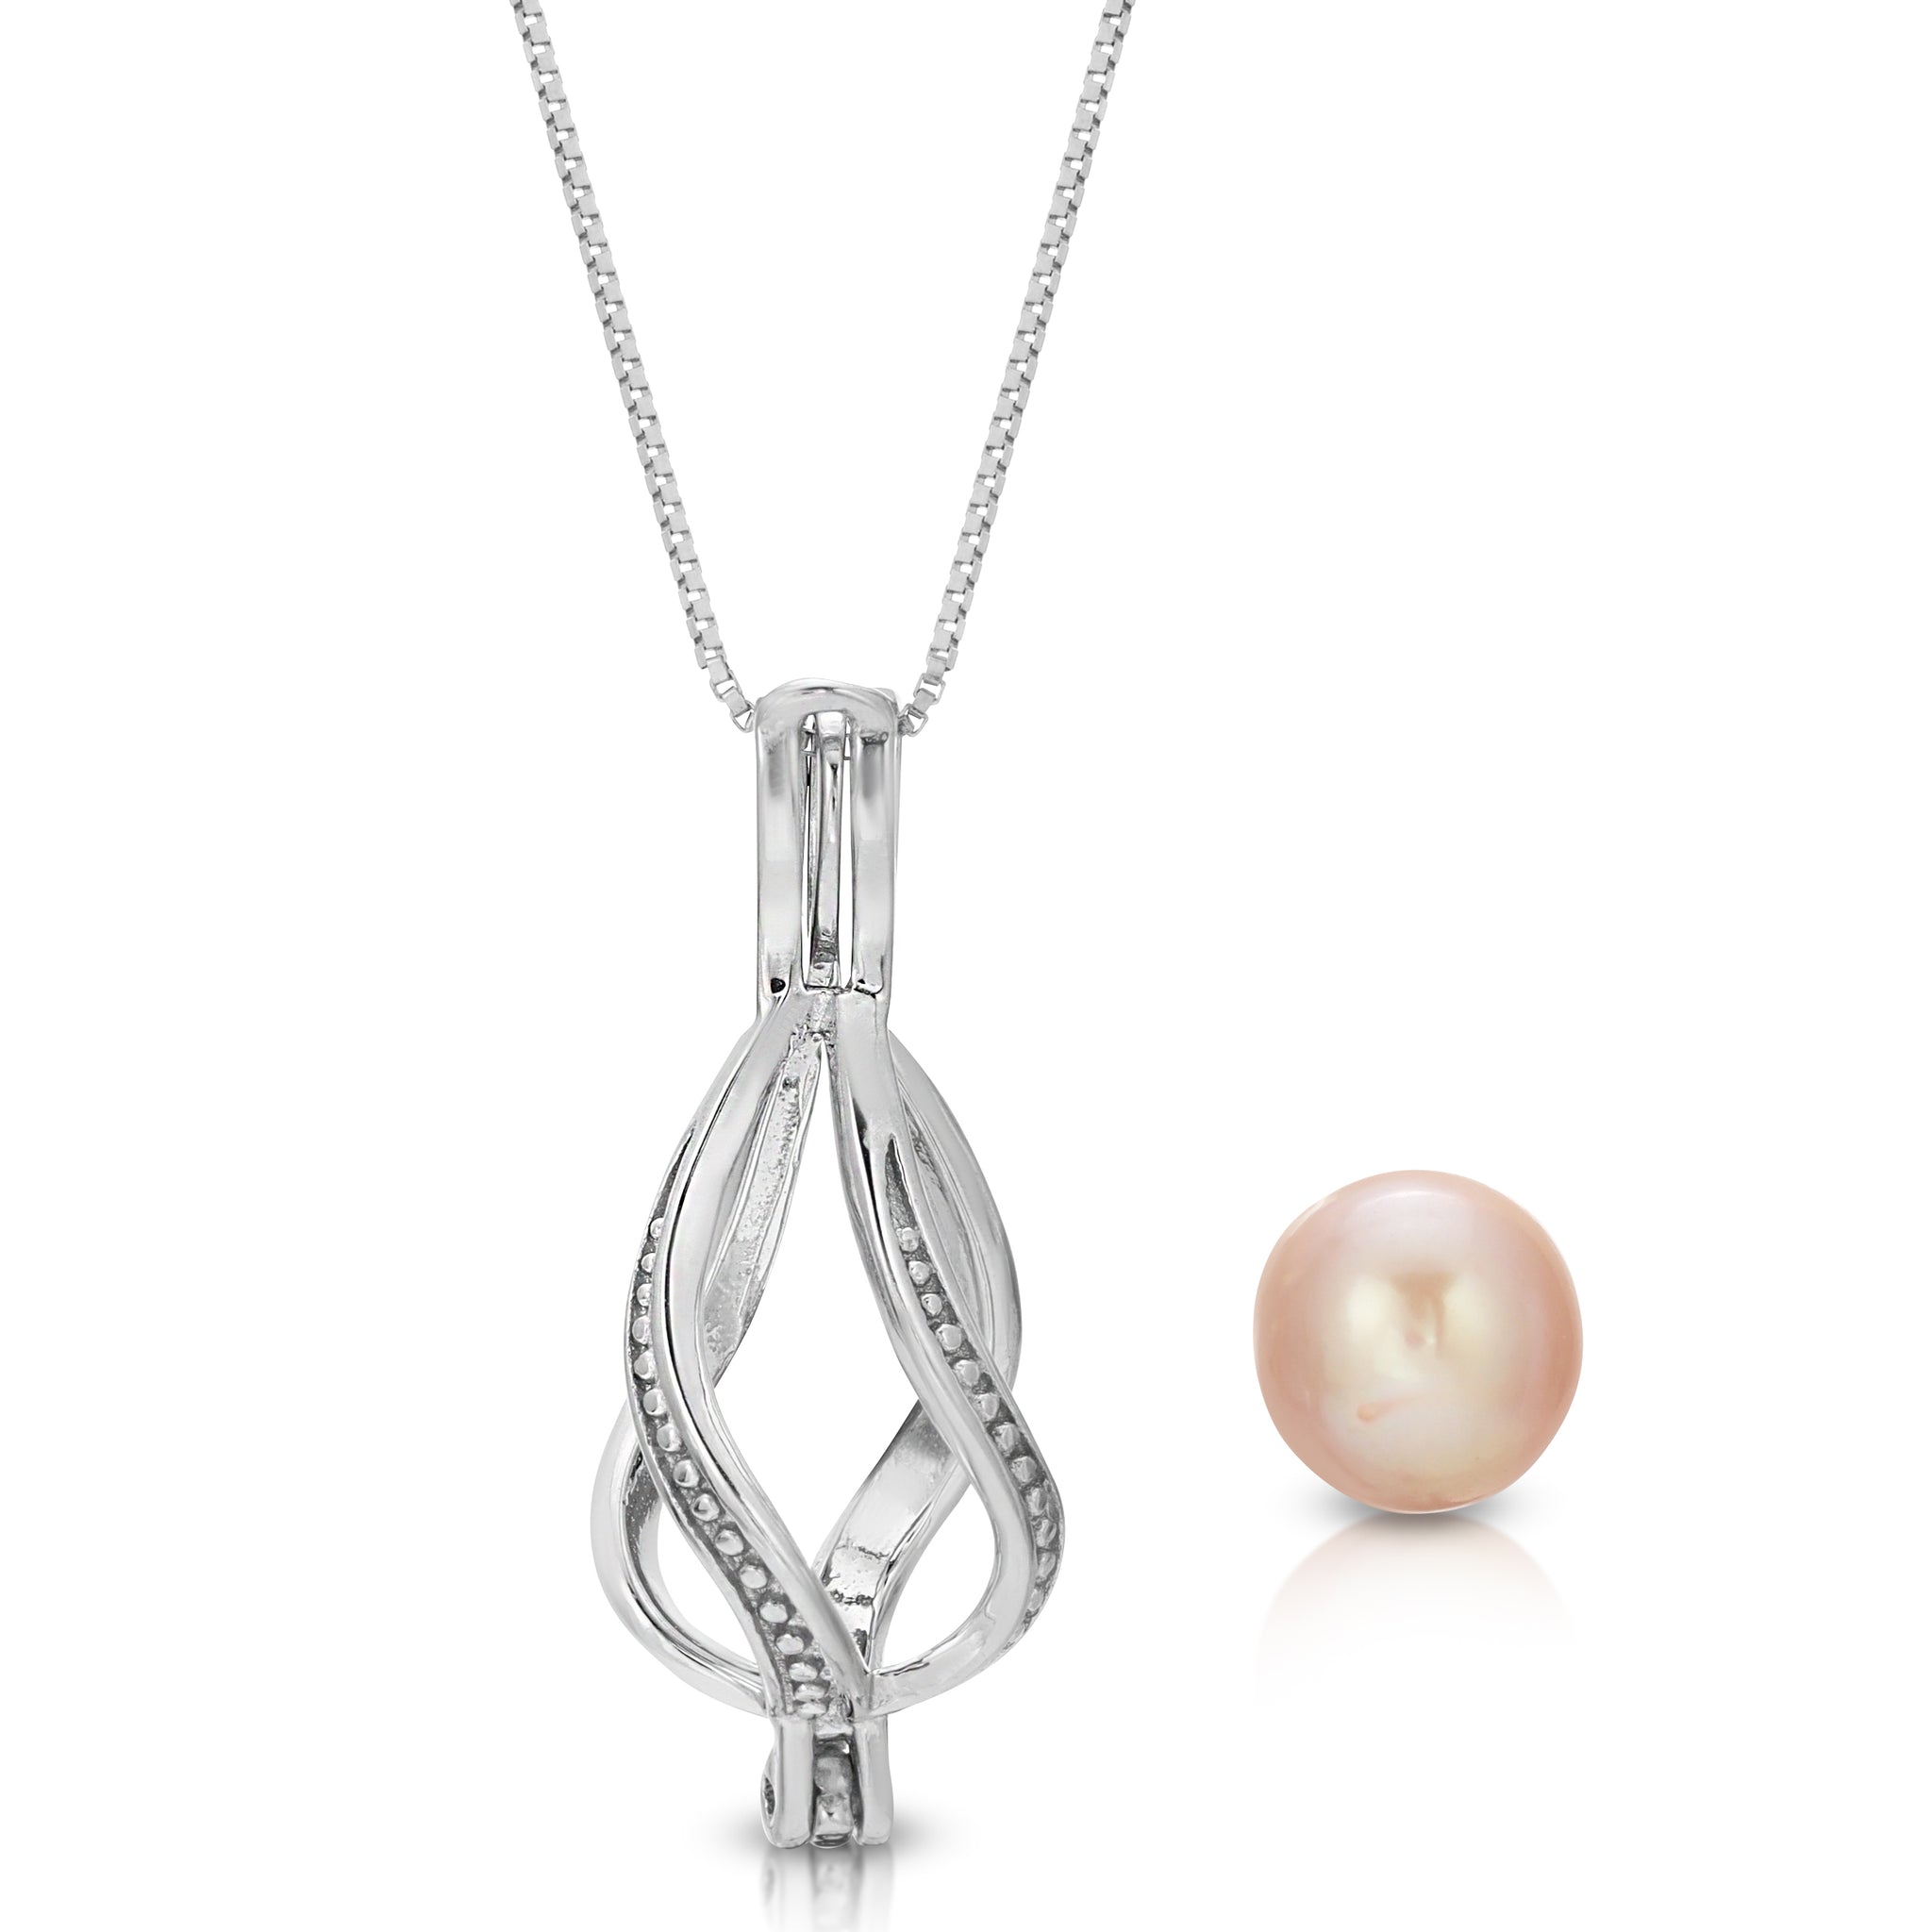 Freshwater Pearl Necklace on 18K White Gold Plated Chain Pearl Cage Pendant  | eBay